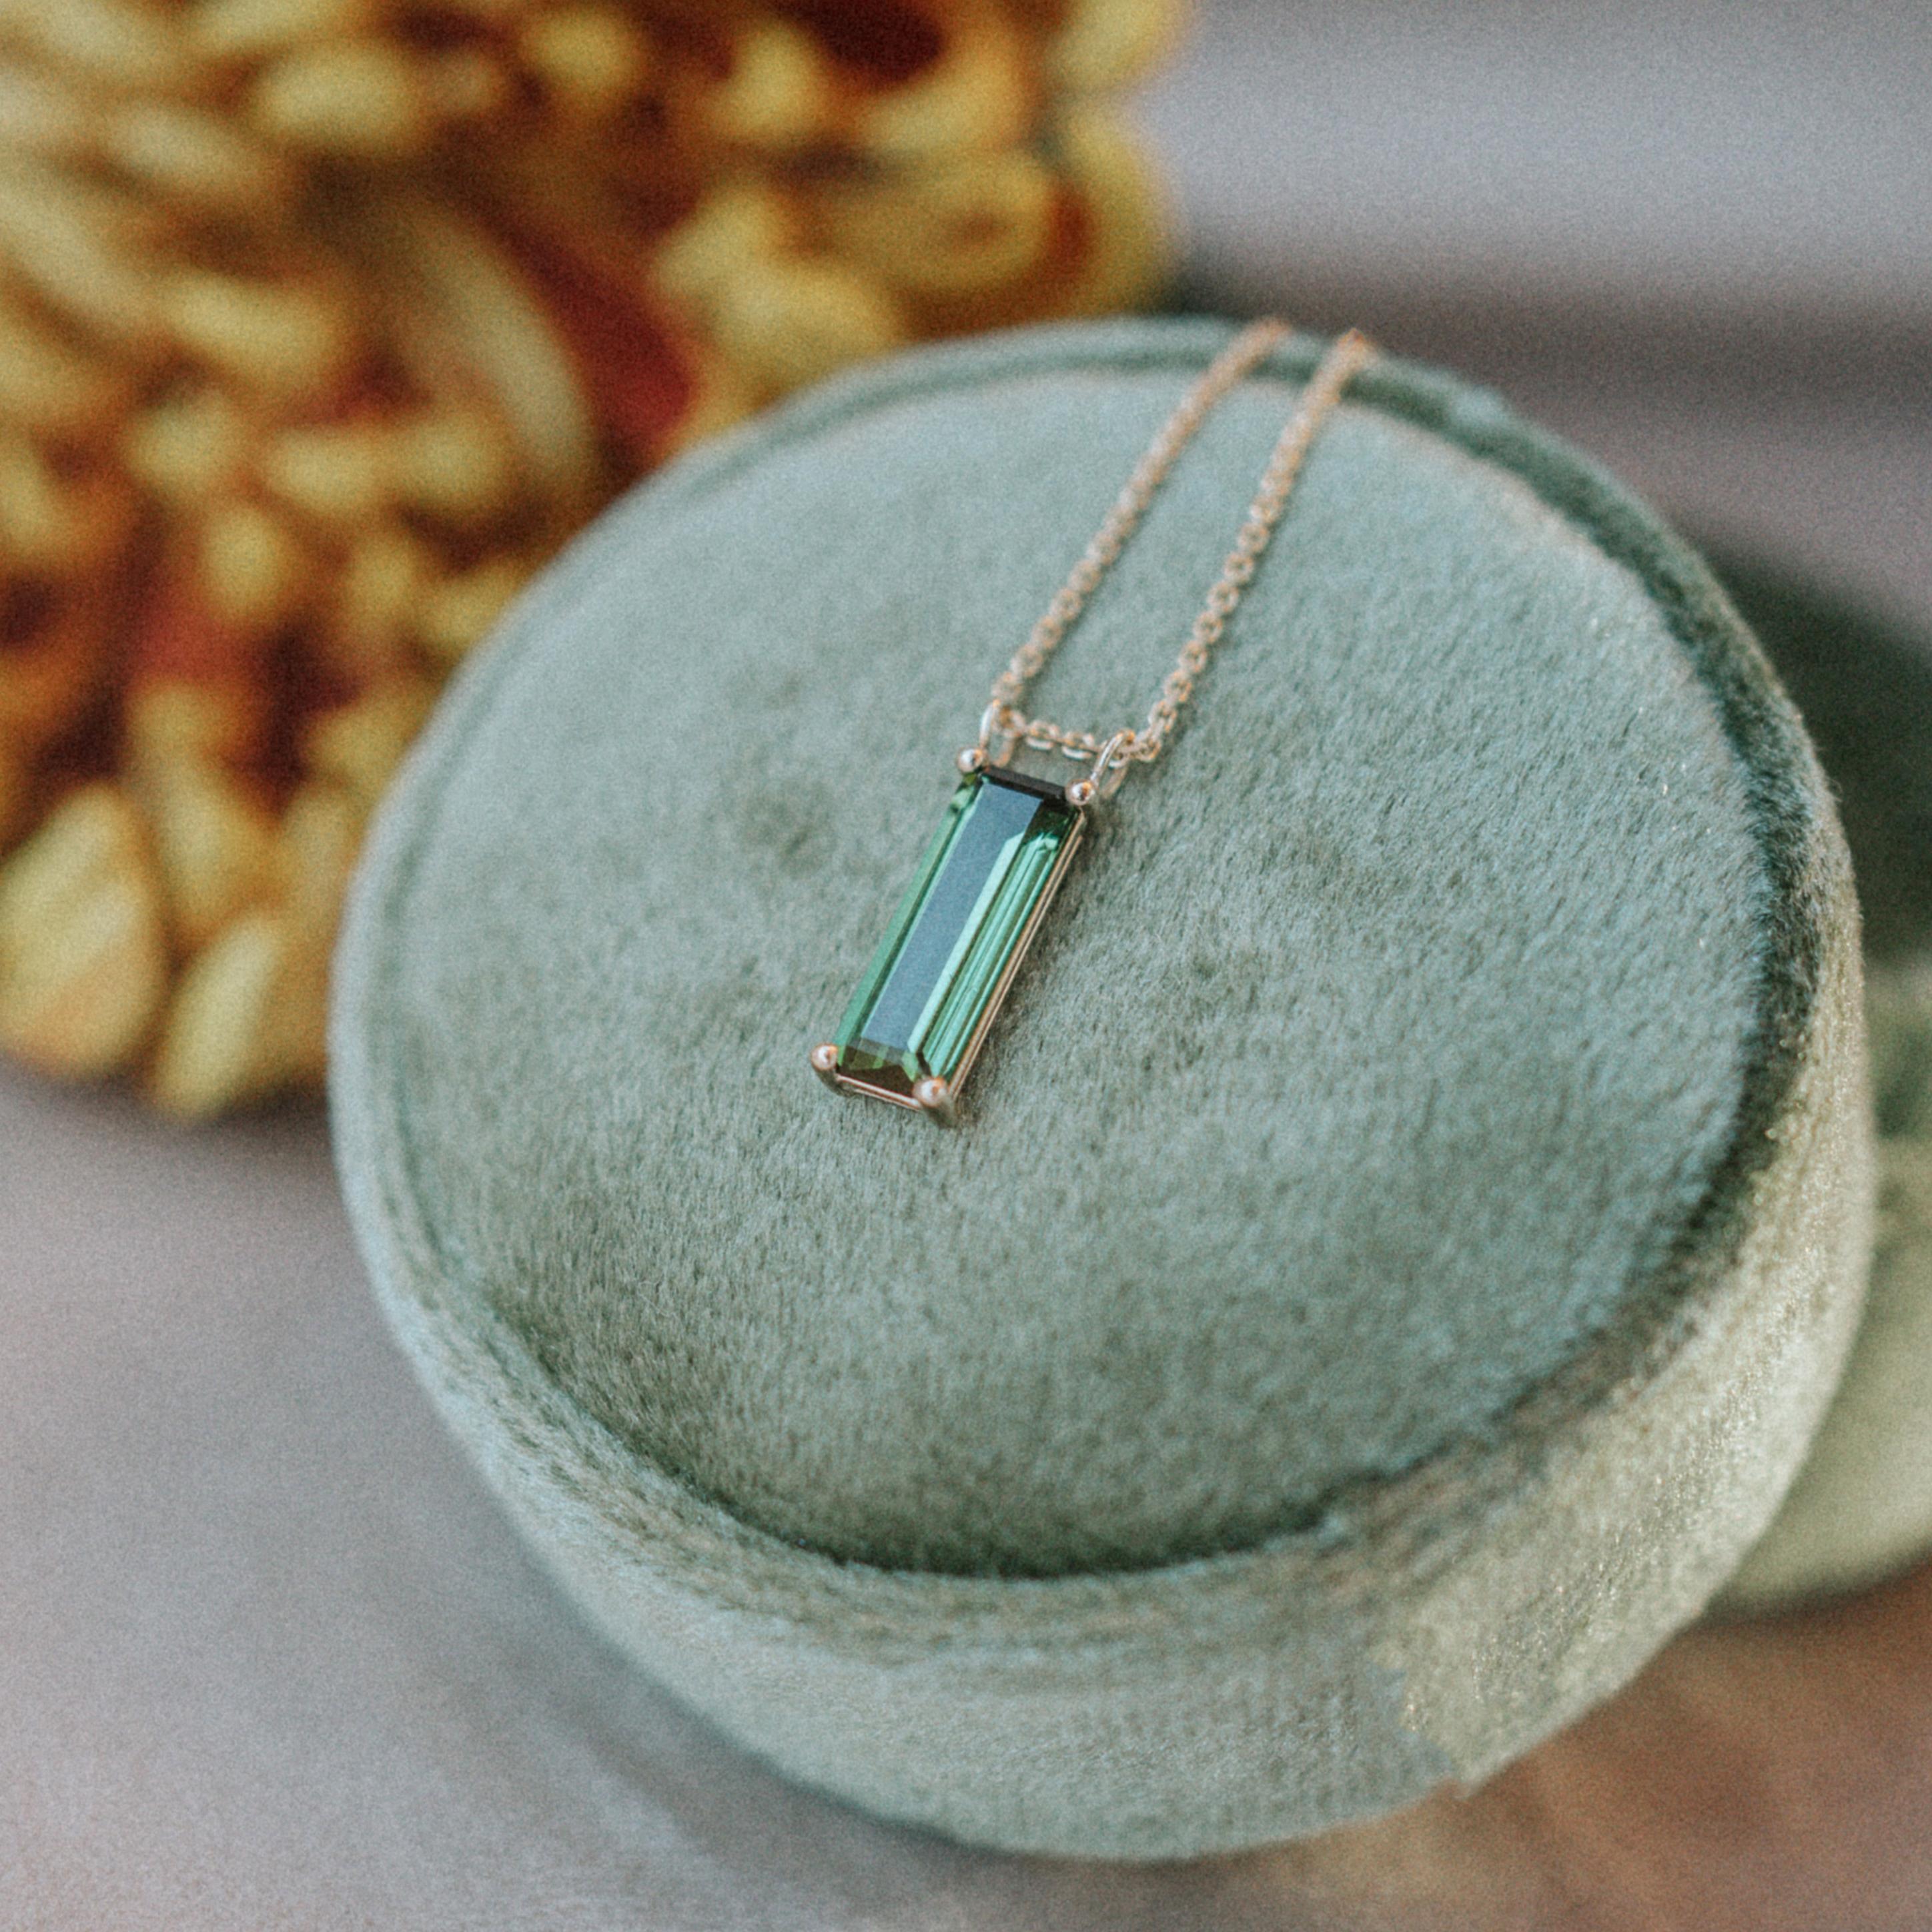 Necklace with a natural green tourmaline set in yellow gold 14k.
Tourmaline of 1.6 ct, cut as an elongated baguette (13 mm x 4.5 mm) is sliding on the diamond-cut chain 18